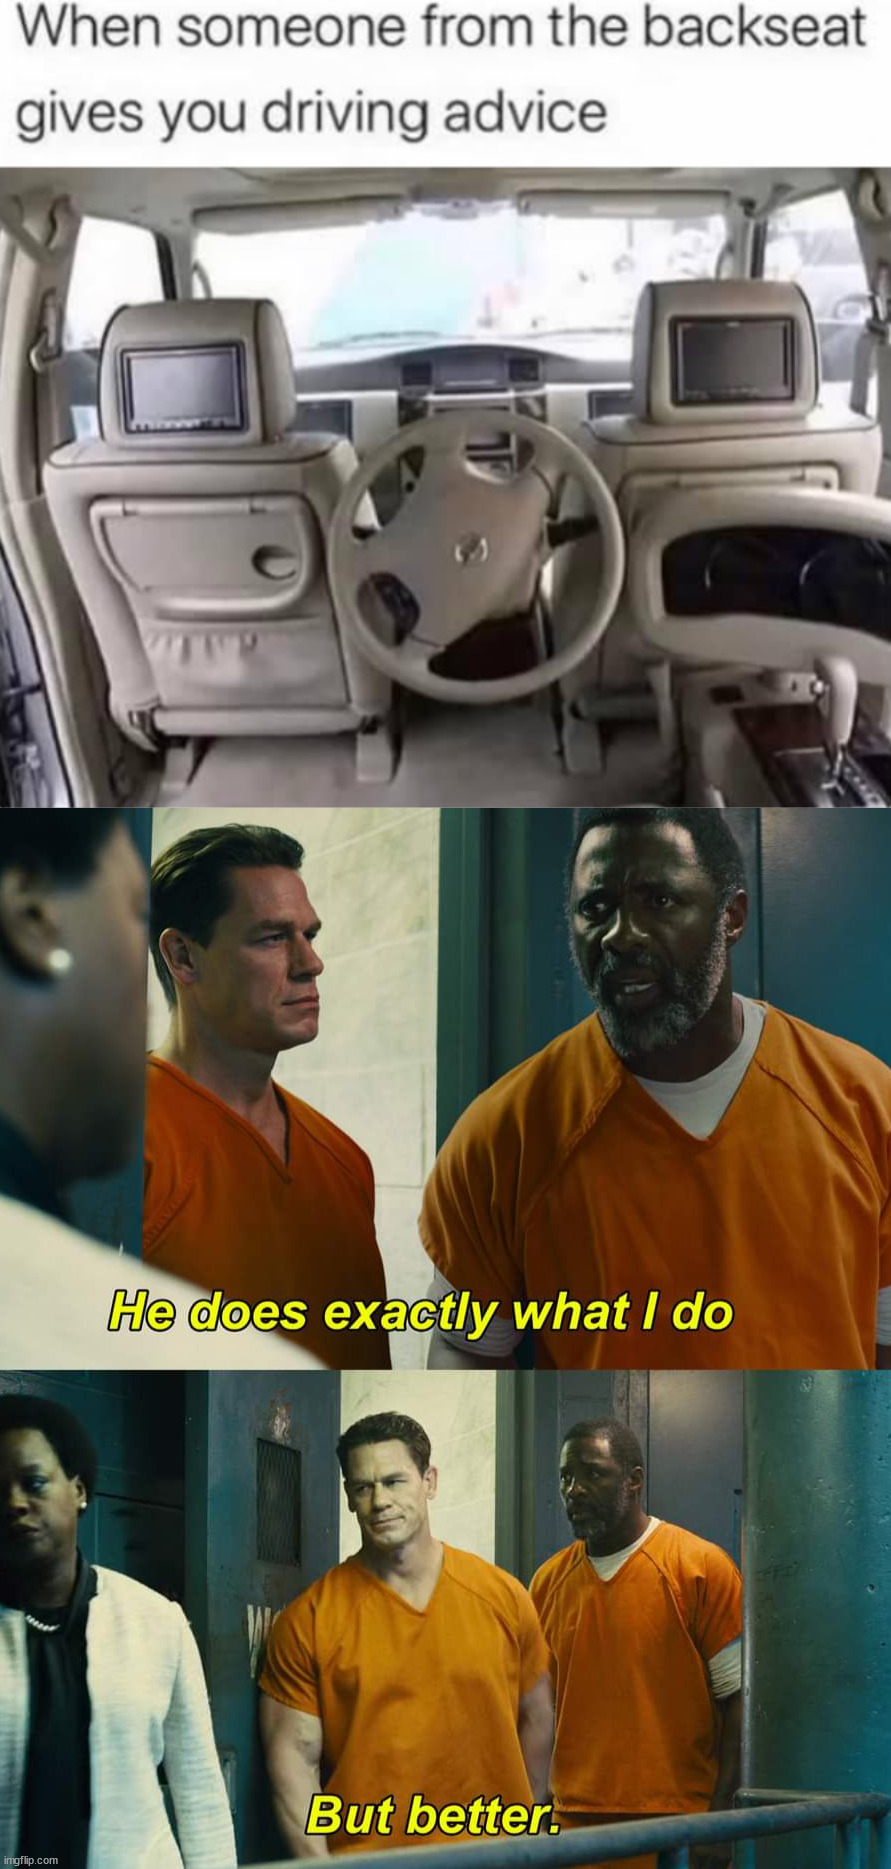 Back seat drivers | image tagged in he does exactly what i do but better,driving,back seat | made w/ Imgflip meme maker